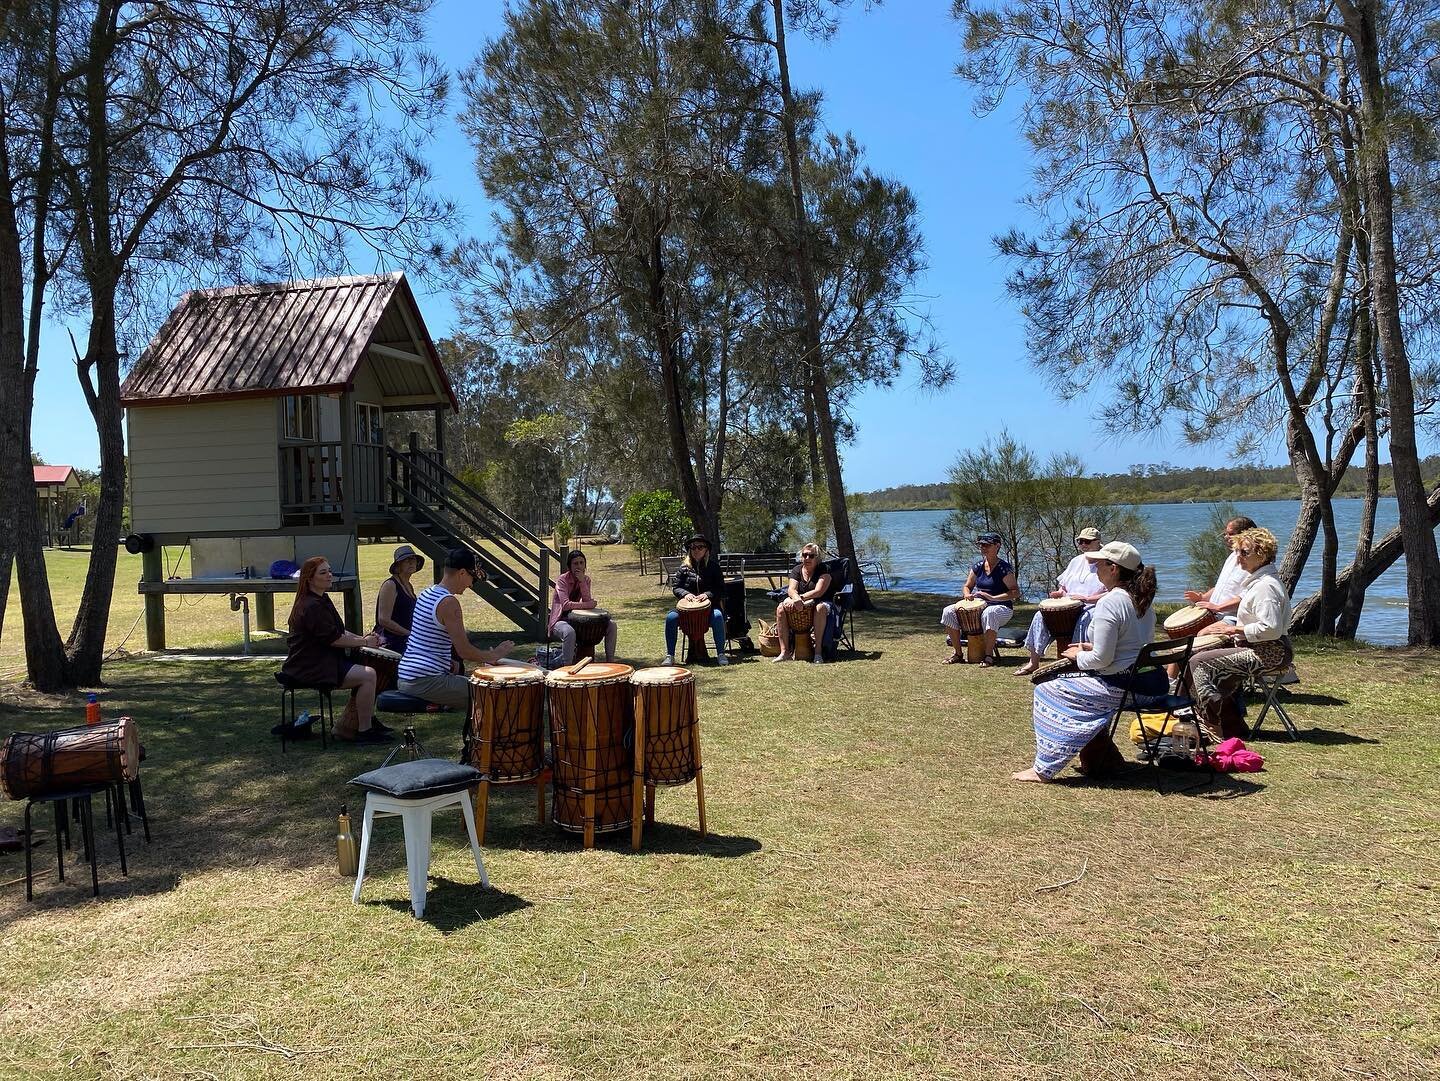 We had such a fantastic couple of days drumming our hearts out by the waters of Micalo Island in Yamba. Thanks to Jan Armstrong for sharing your beautiful property with us. Thanks also to those drummers new to the drummergirl community who trusted me